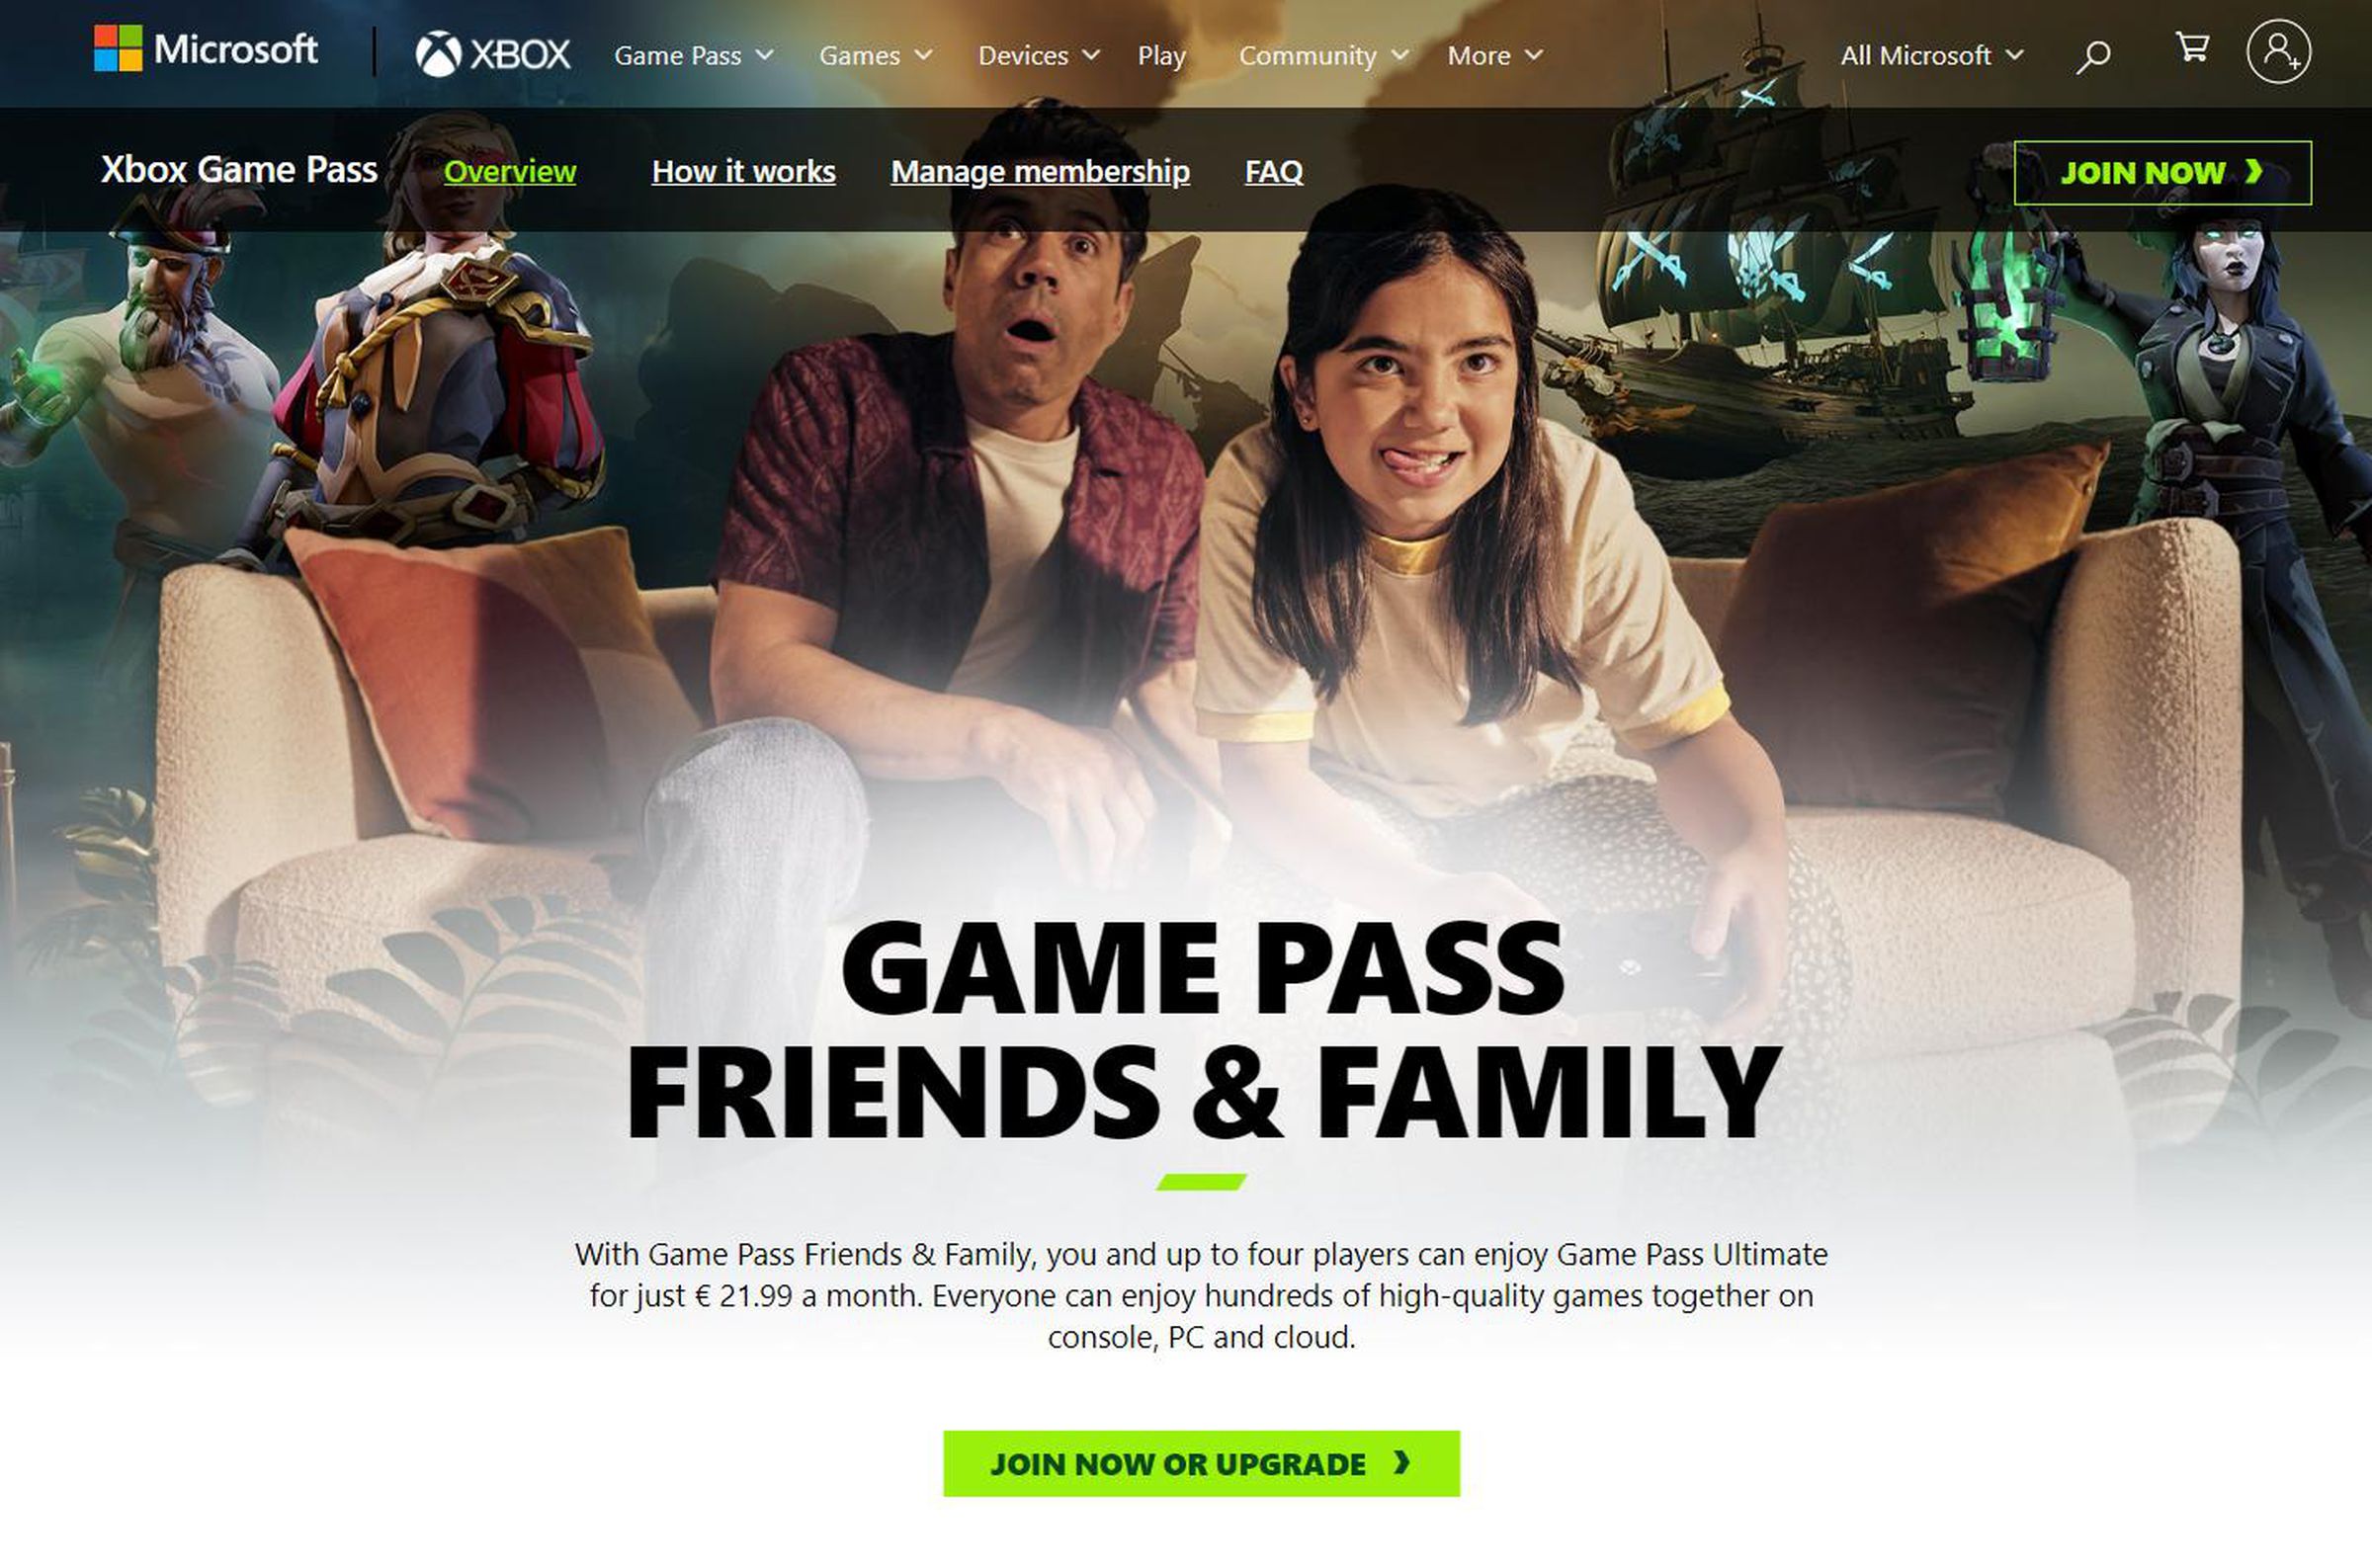 The new Friends & Family subscription is official now.